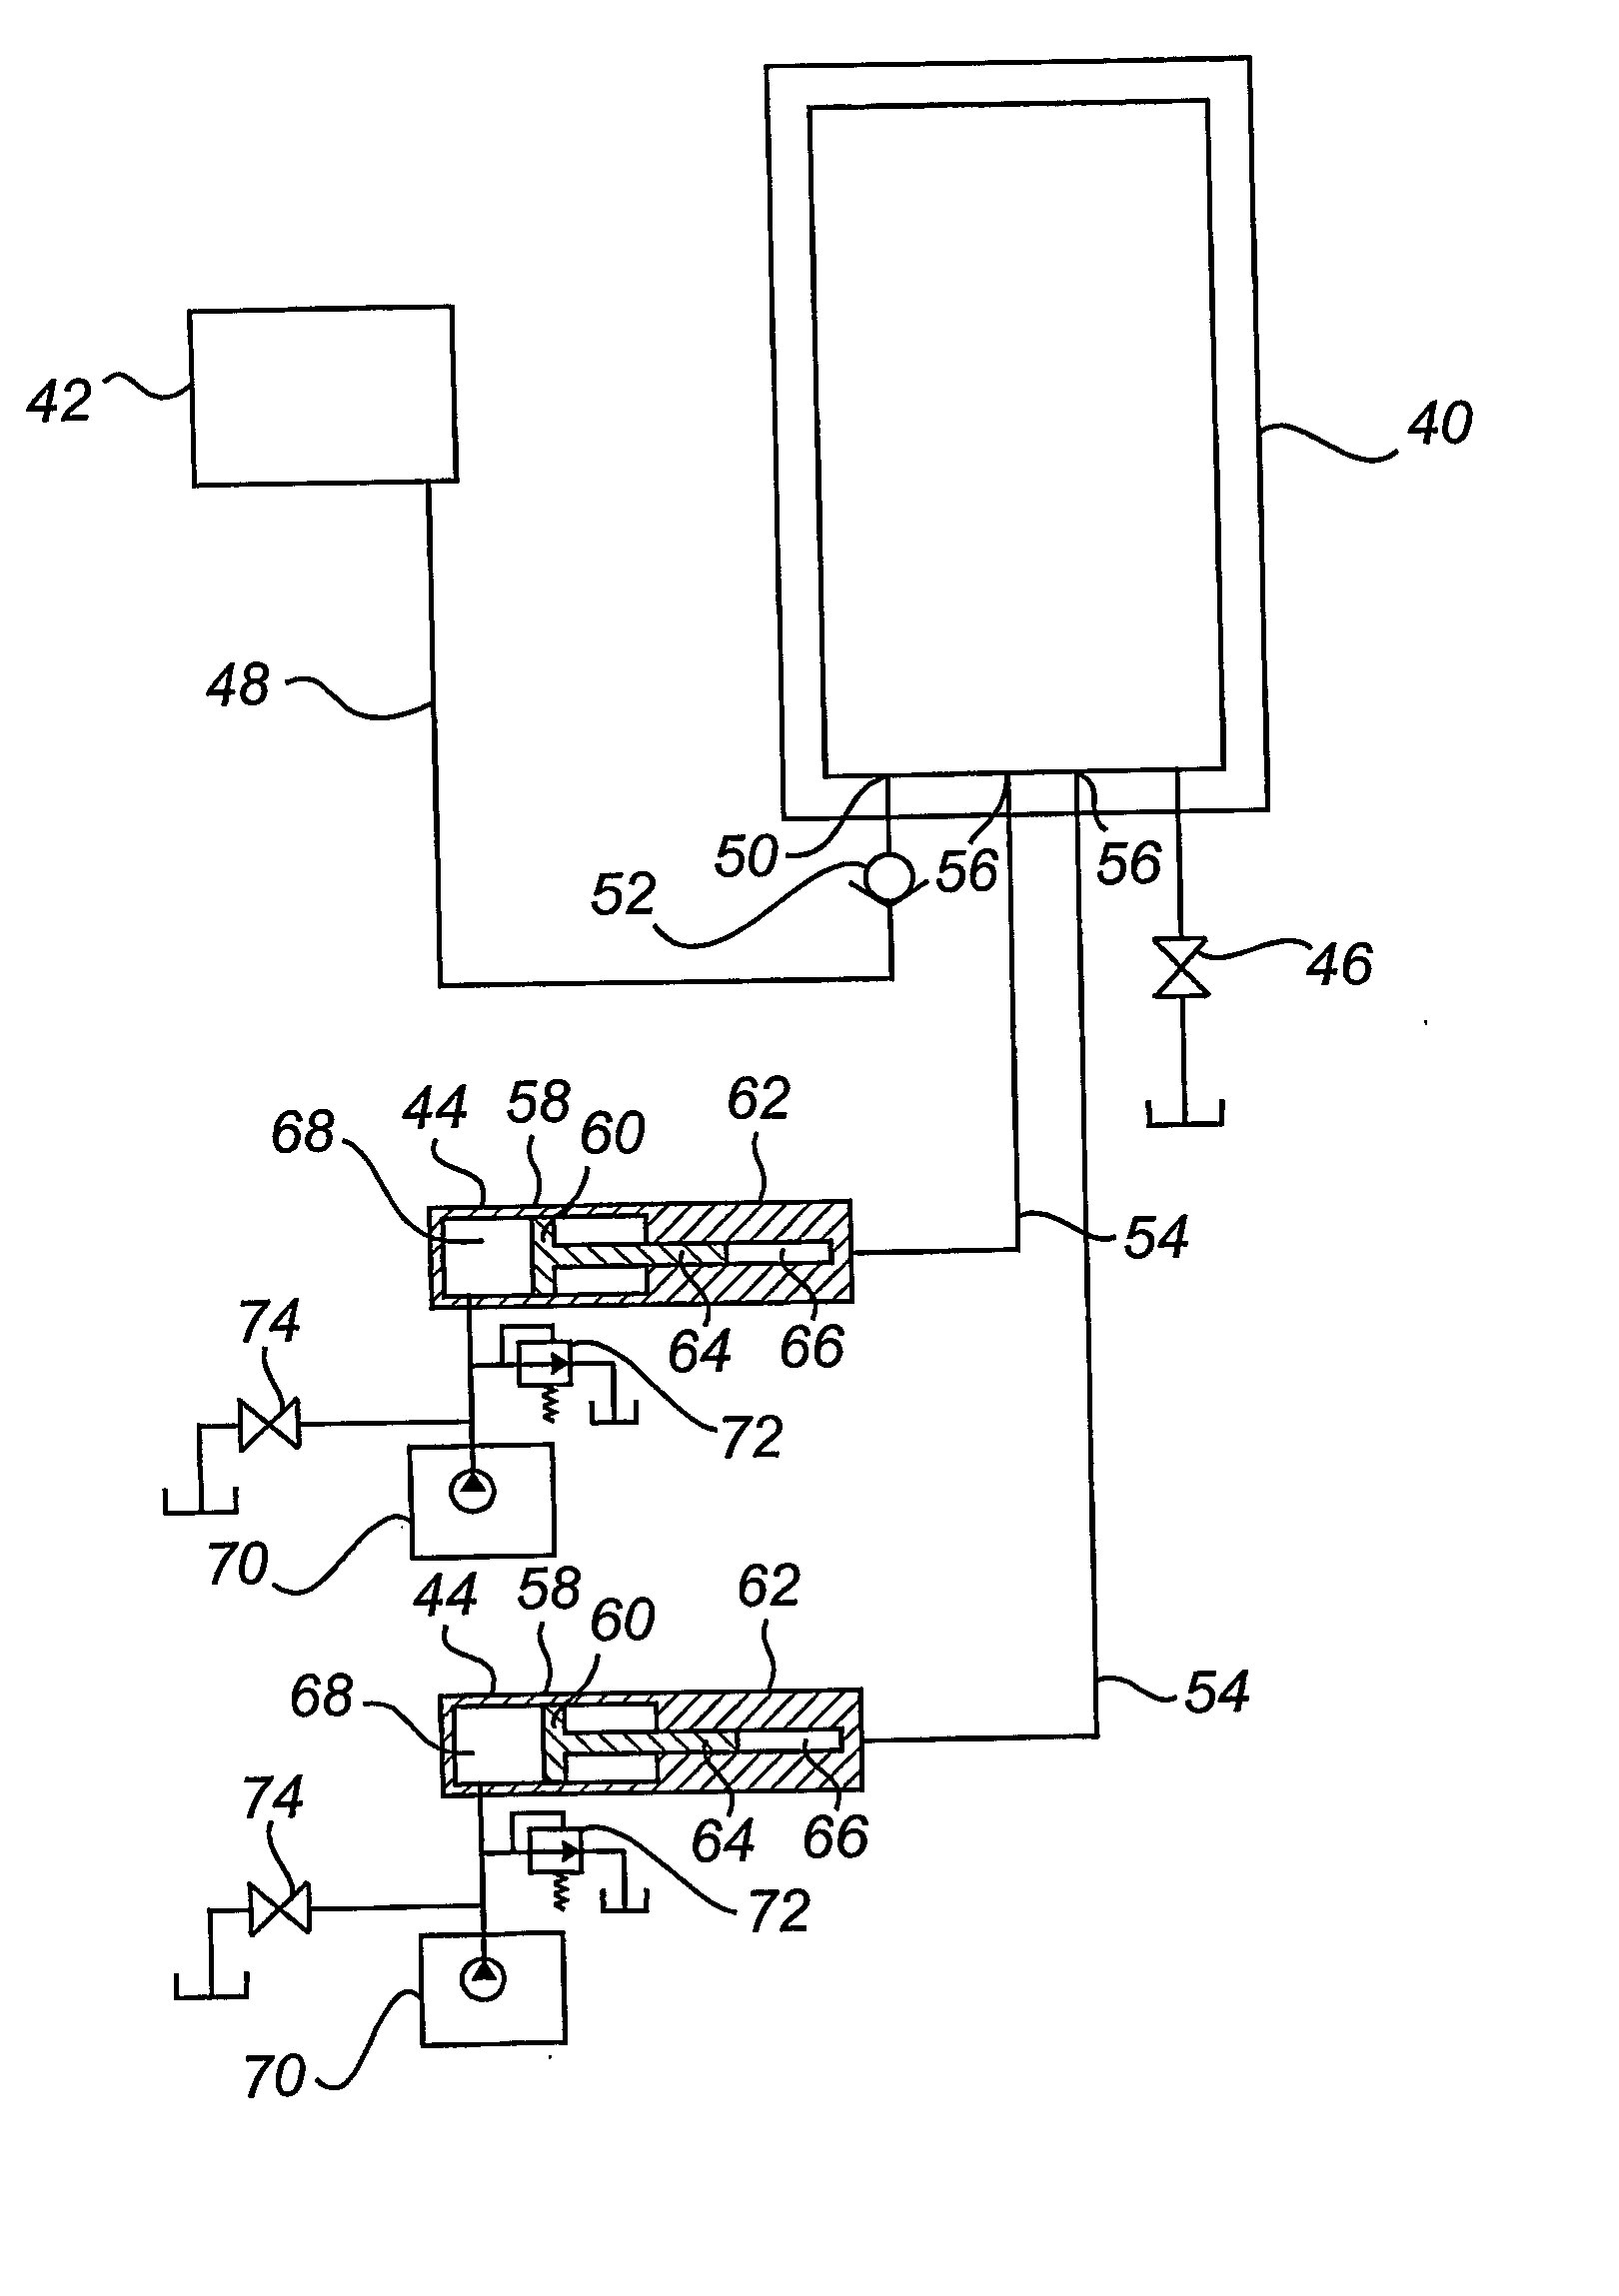 High pressure pressing device and method